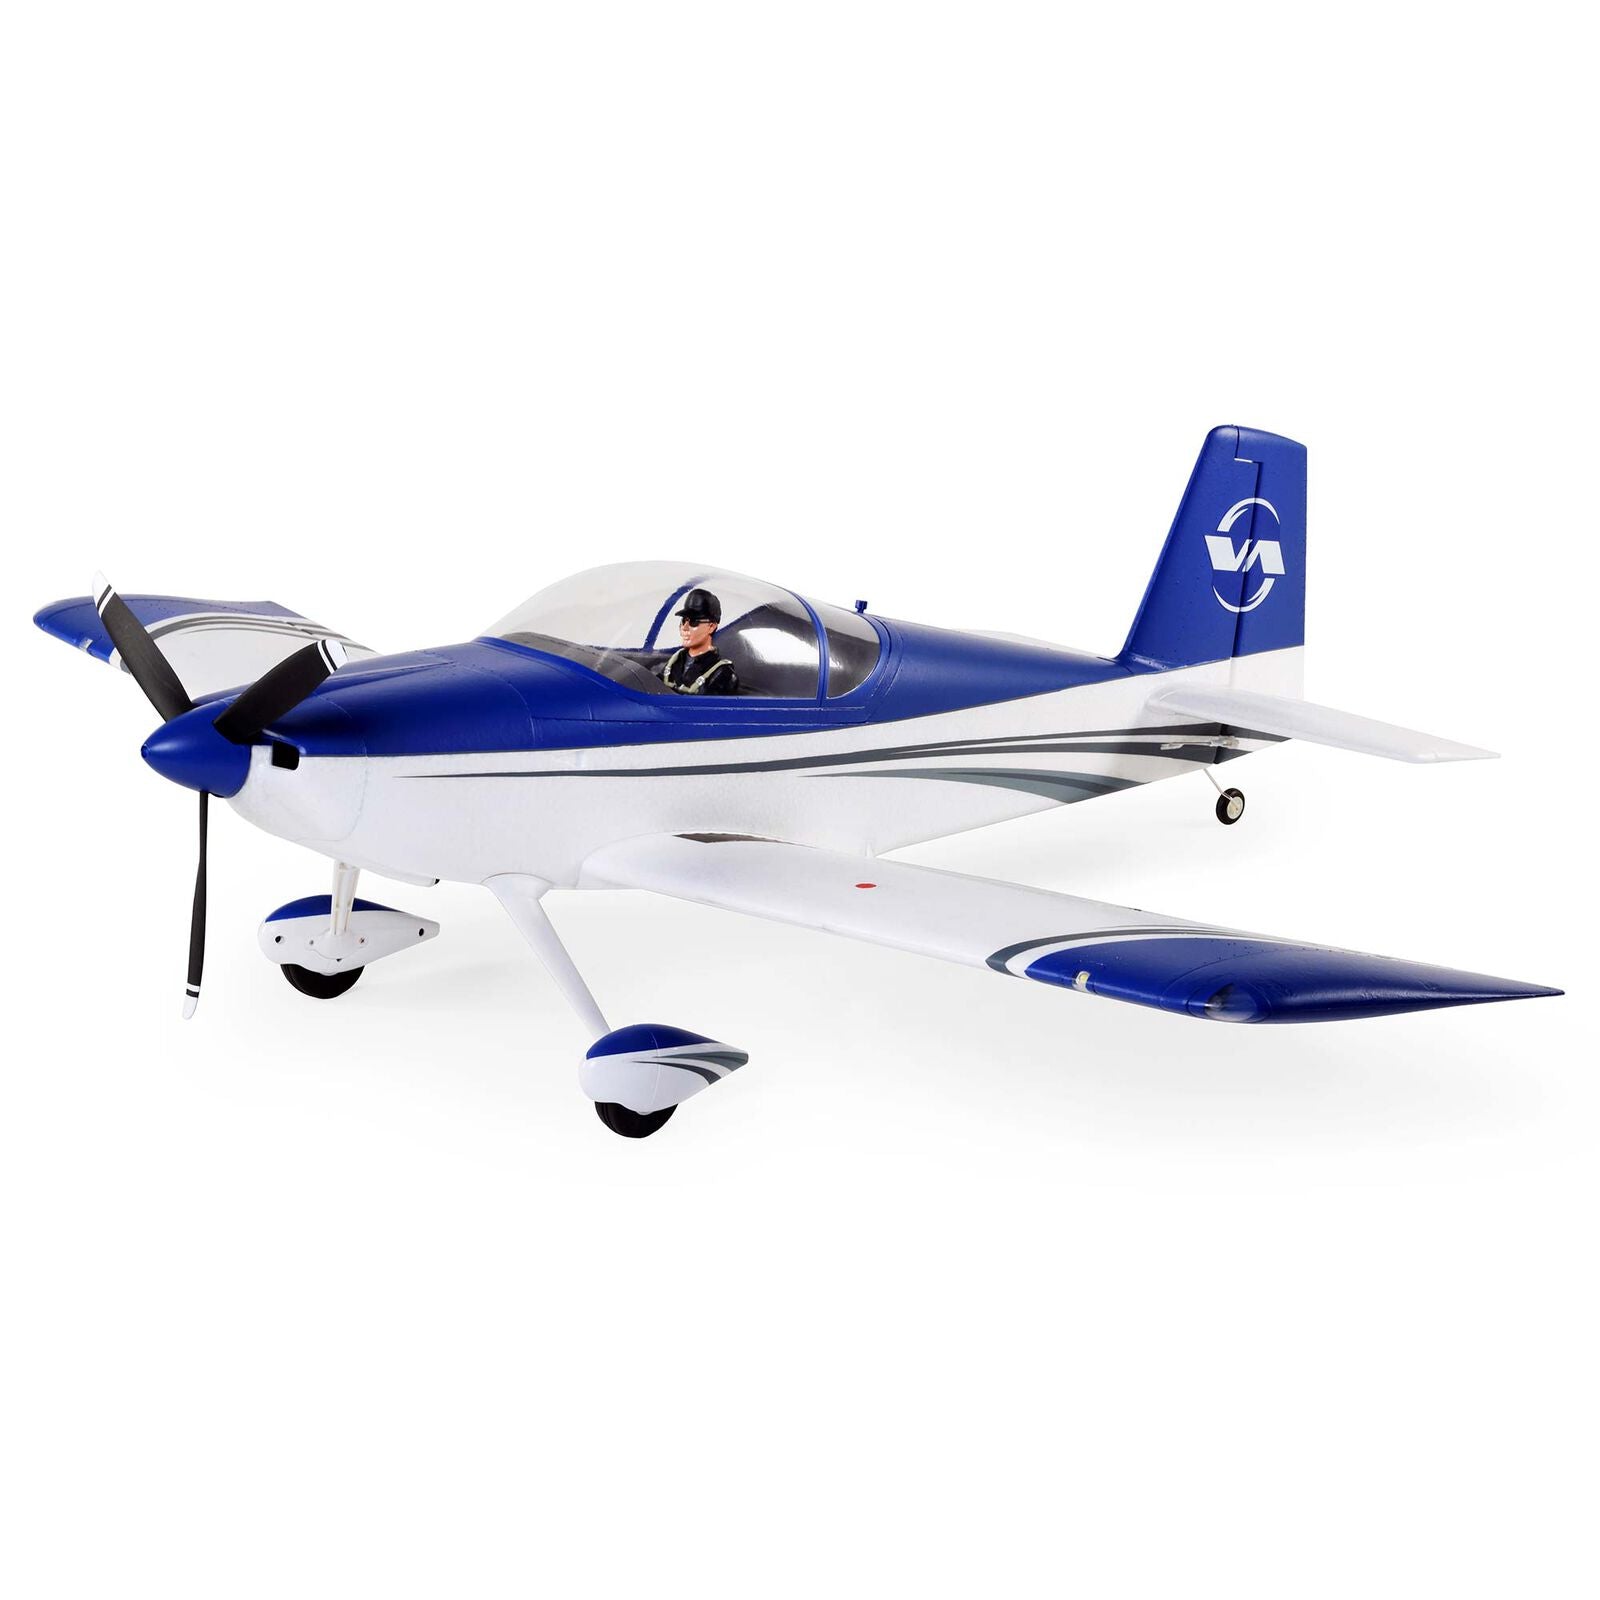 EFLITE EFL01850 RV-7 1.1m BNF Basic with SAFE Select and AS3X